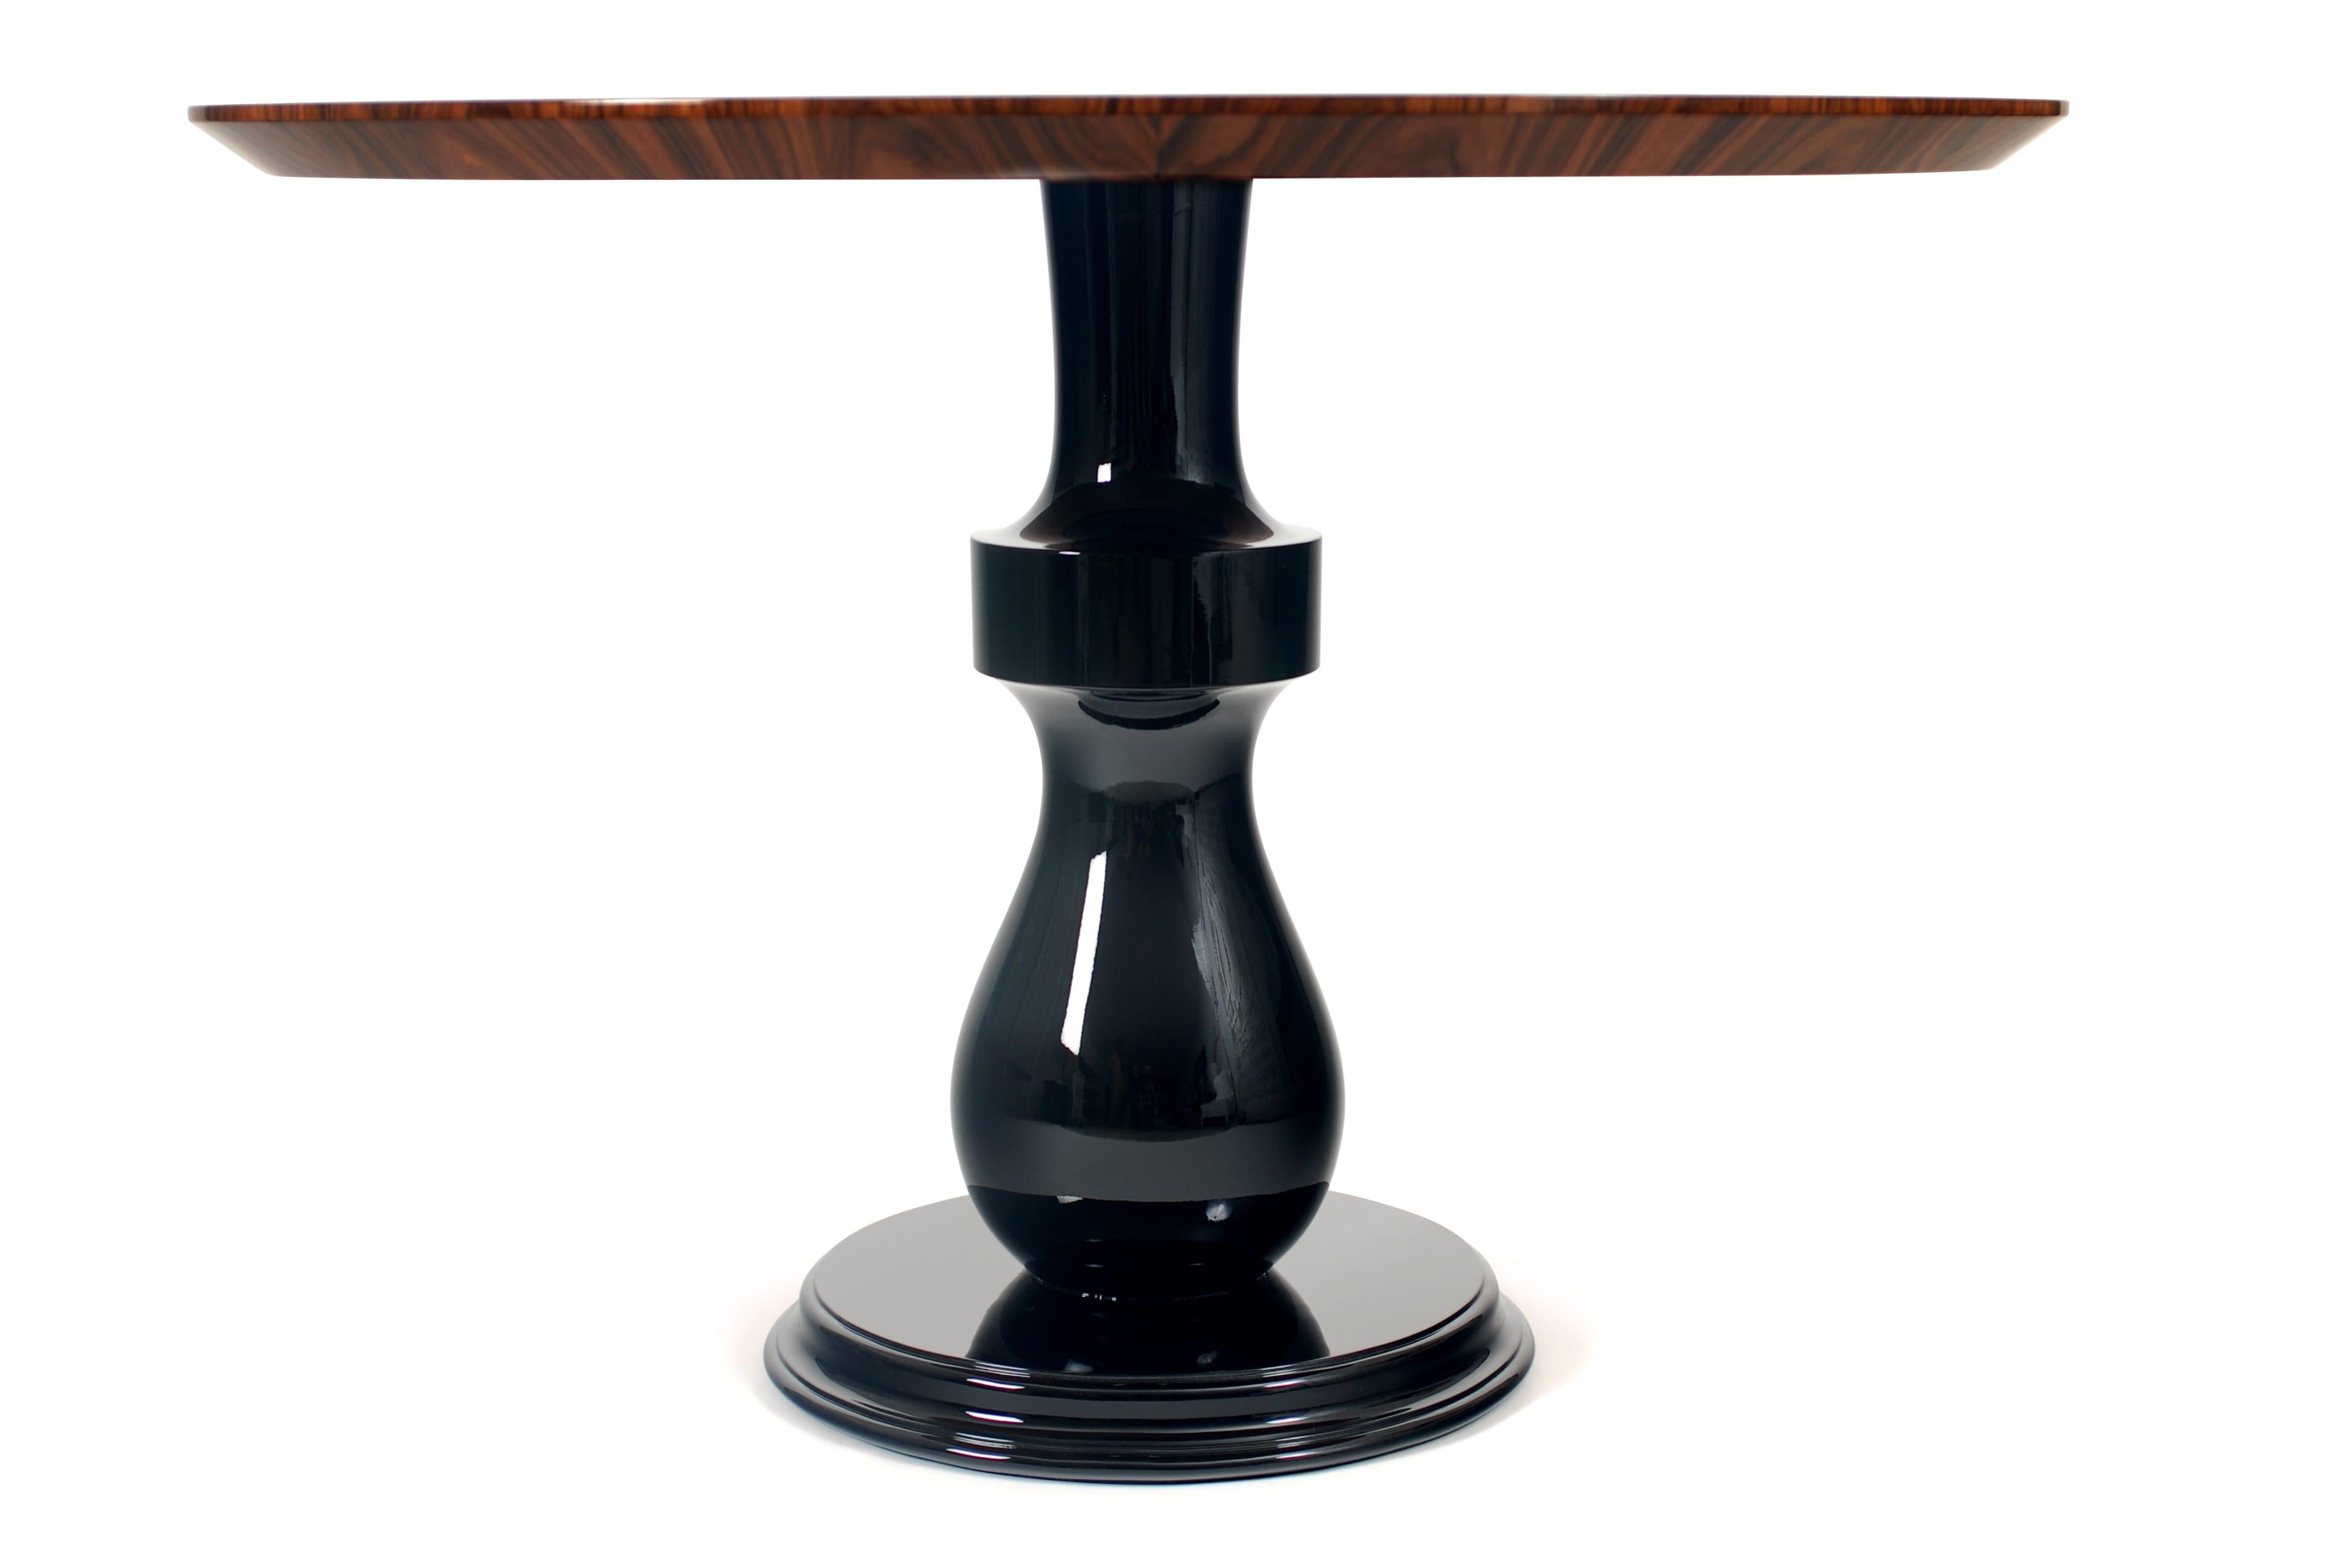 Colombos is the perfect pedestal table for a living room, hallway, entrance or lobby. This very stylish pedestal table is a perfect table to display a beloved collectible, books or perhaps a vase with flowers. Colombos is so functional that can also